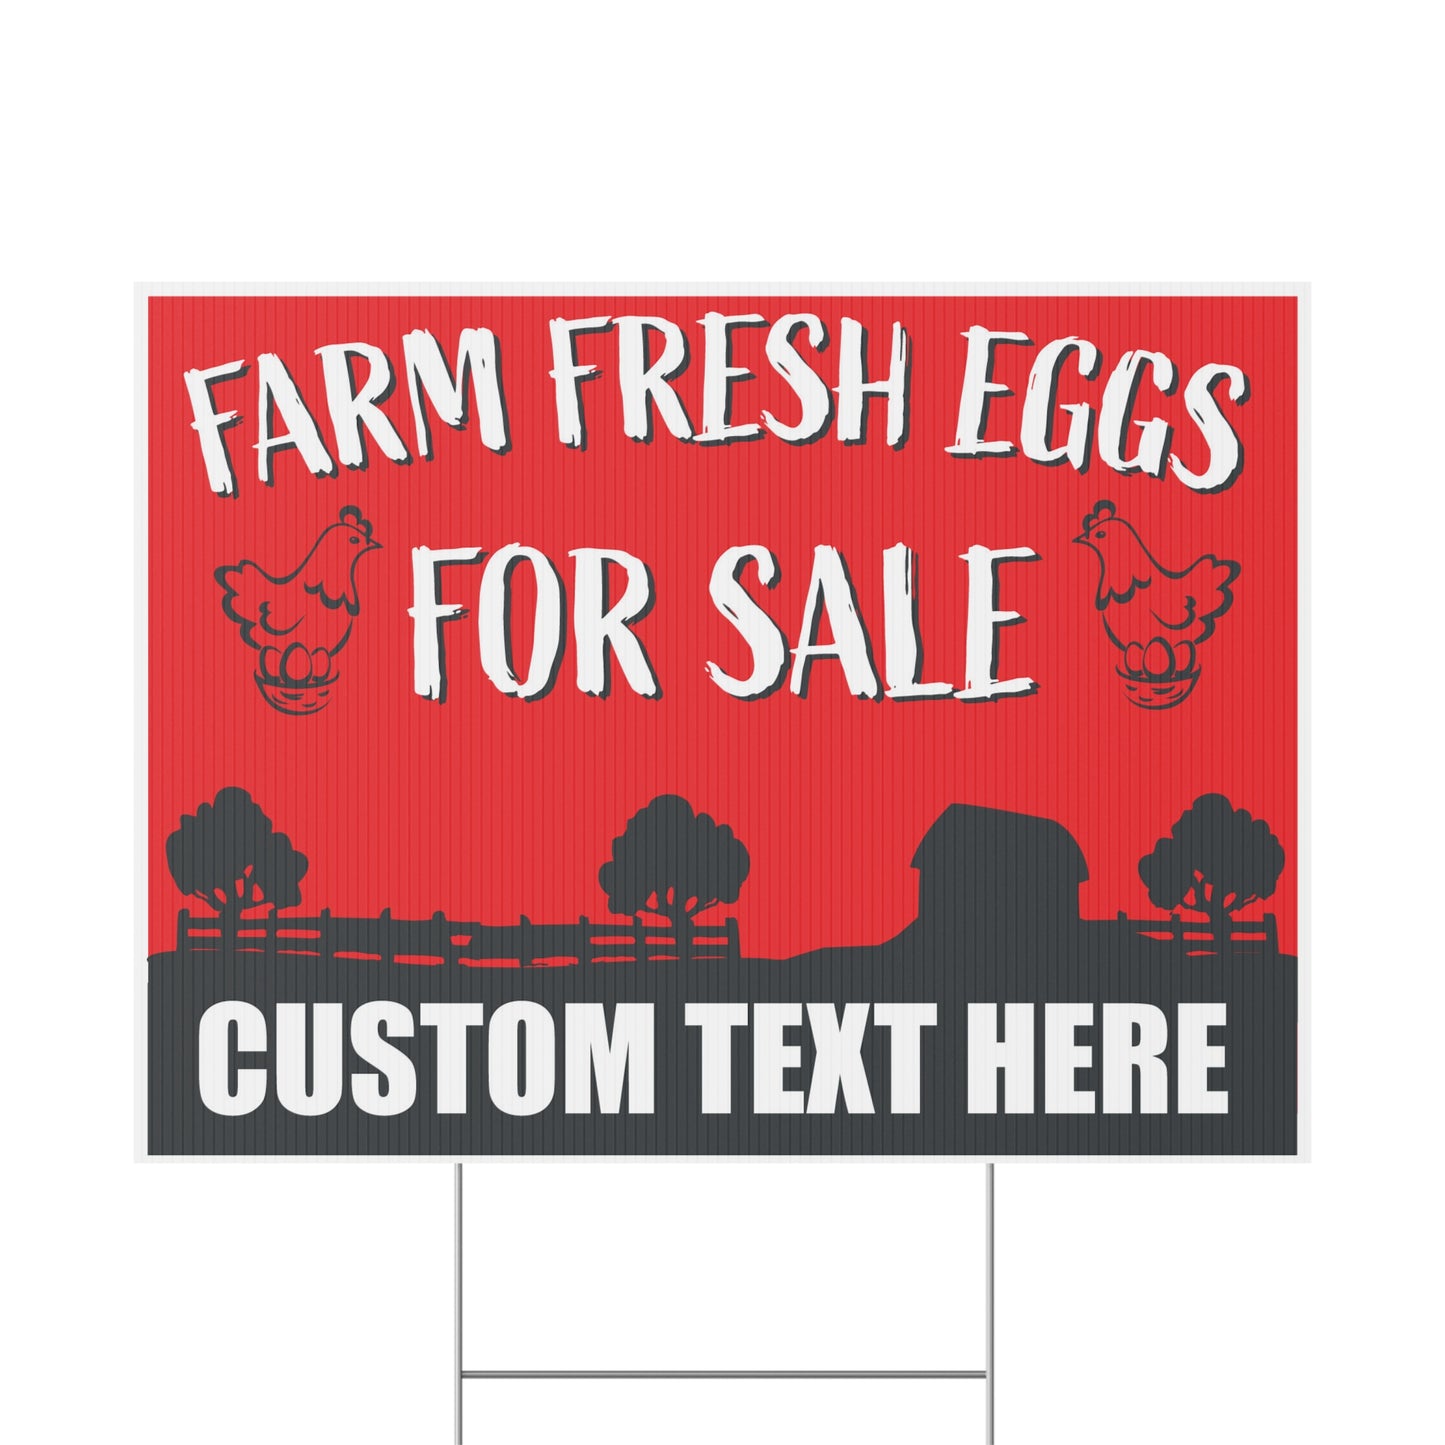 Custom Farm Fresh Eggs For Sale Yard Sign 18 x 24-inch (Outdoor, Weatherproof Corrugated Plastic) Metal H-Stake Included v2_Red